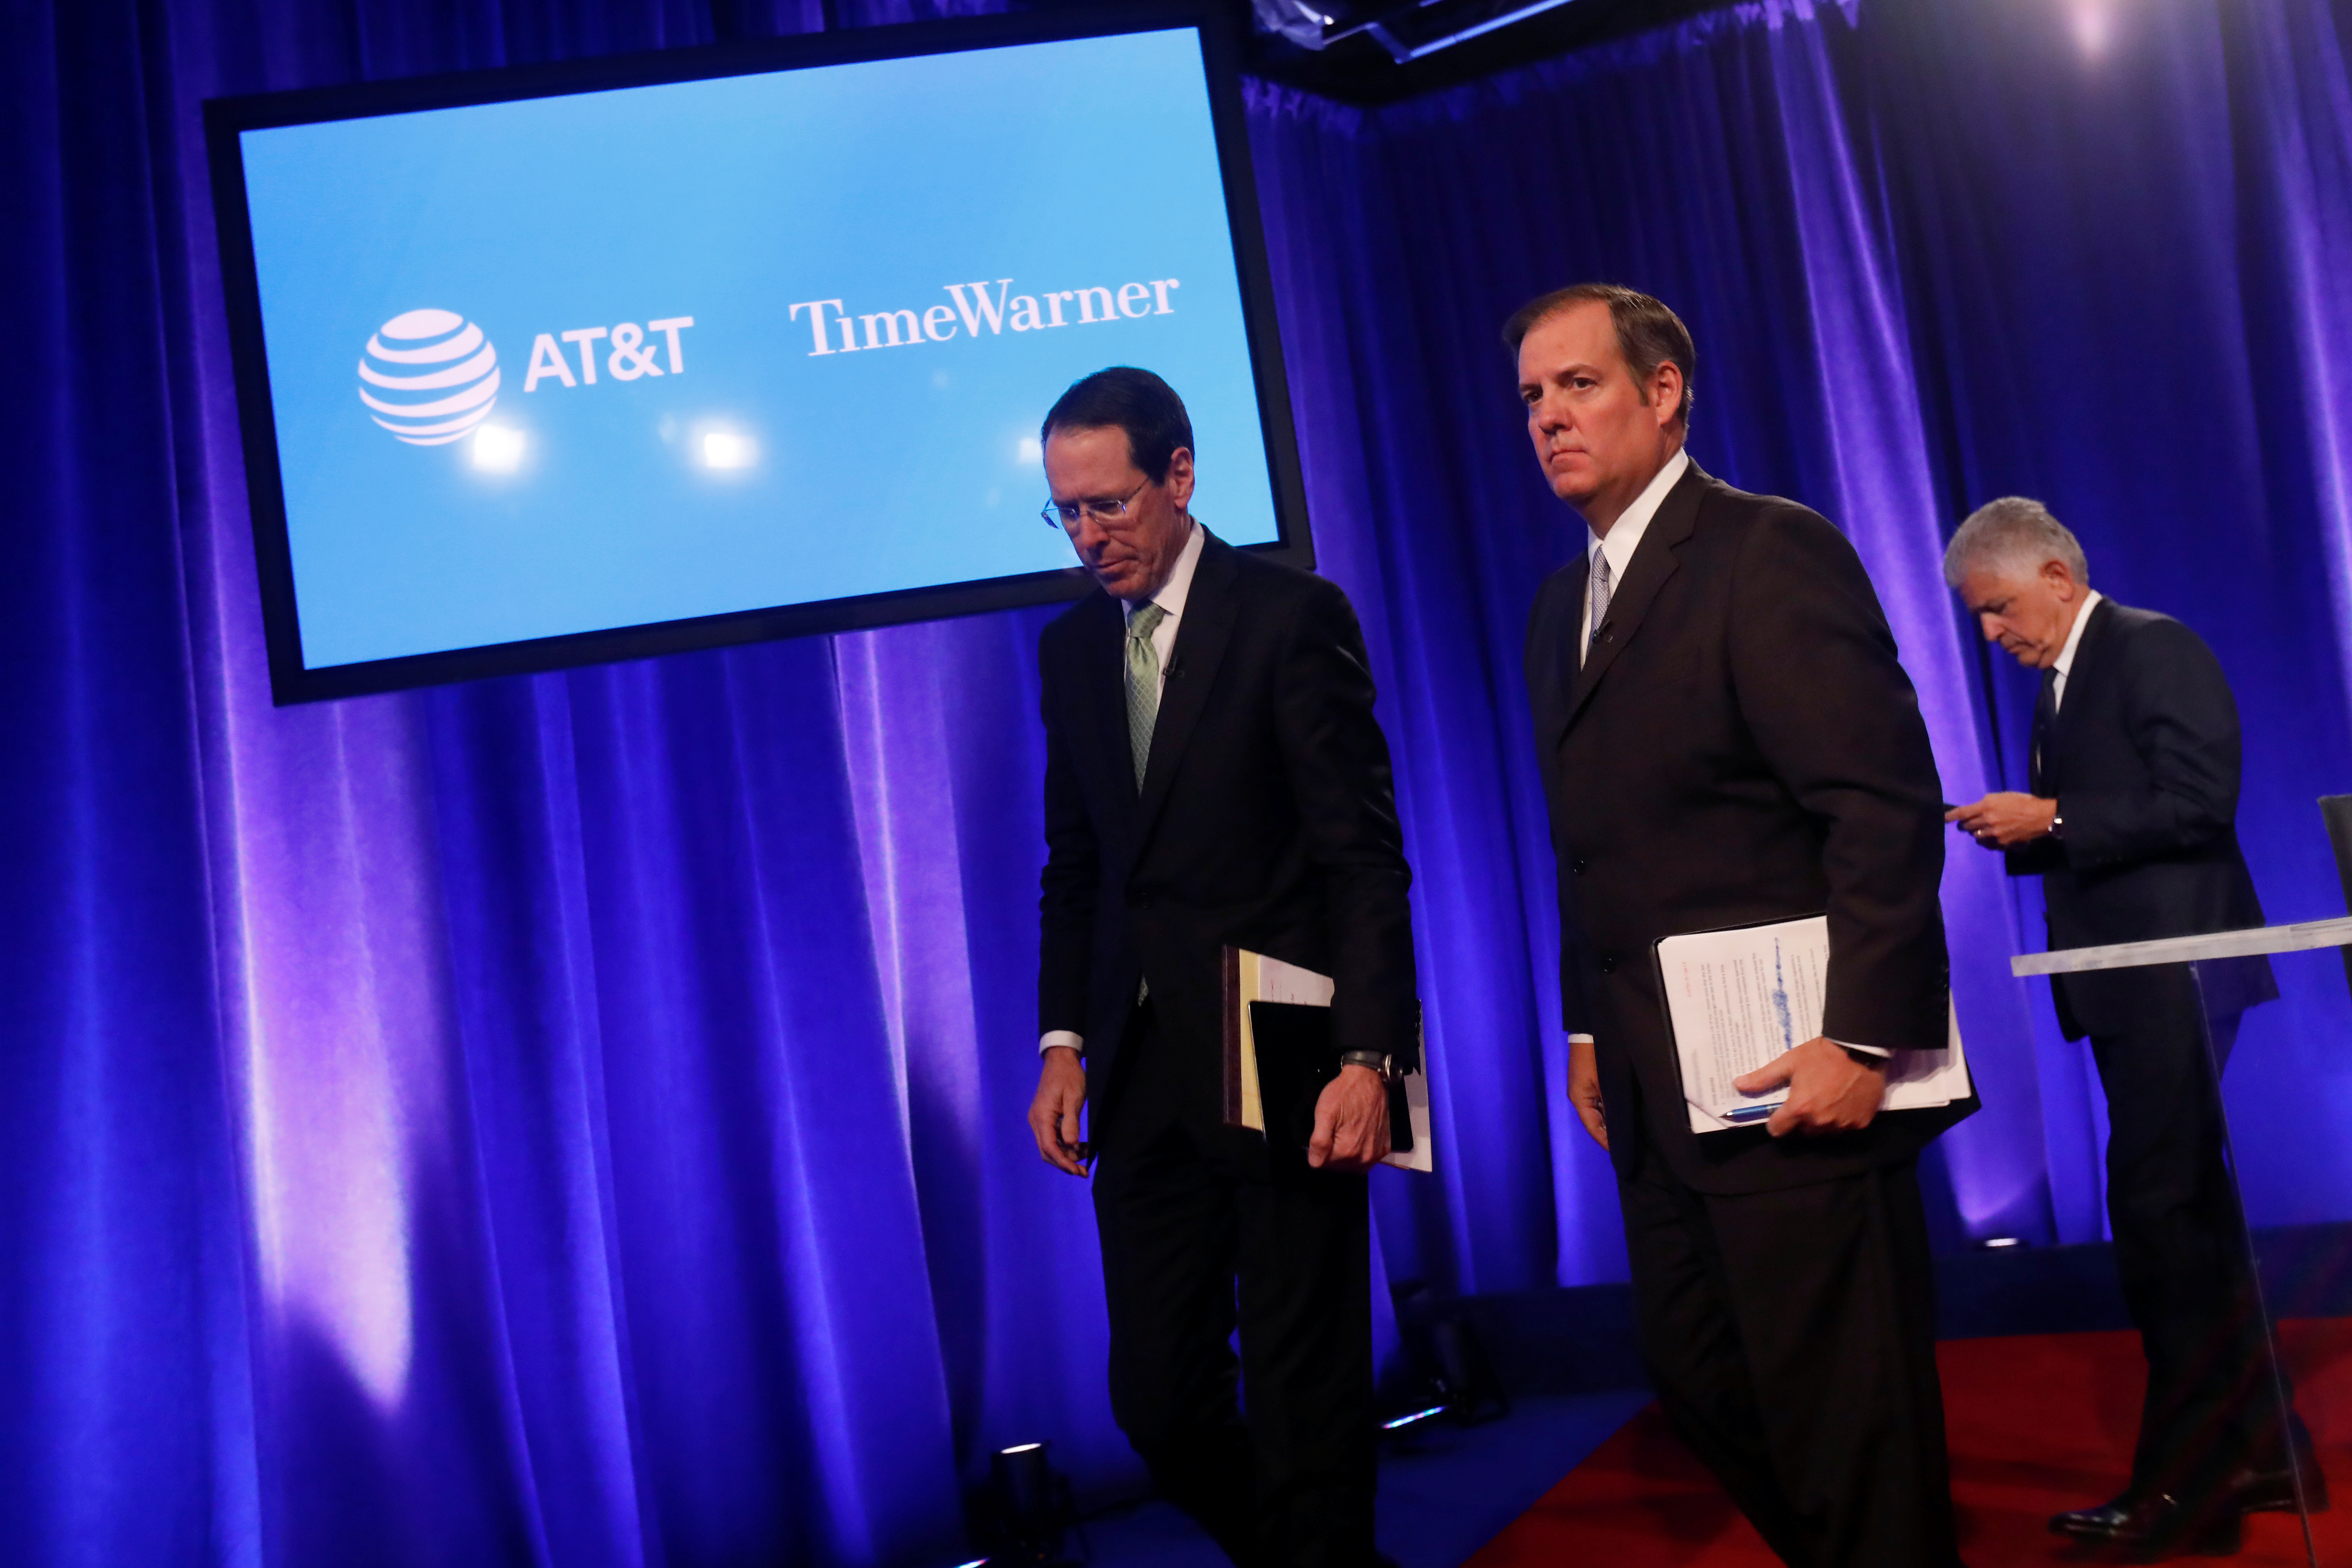 AT&amp;T CEO at a press conference in NYC